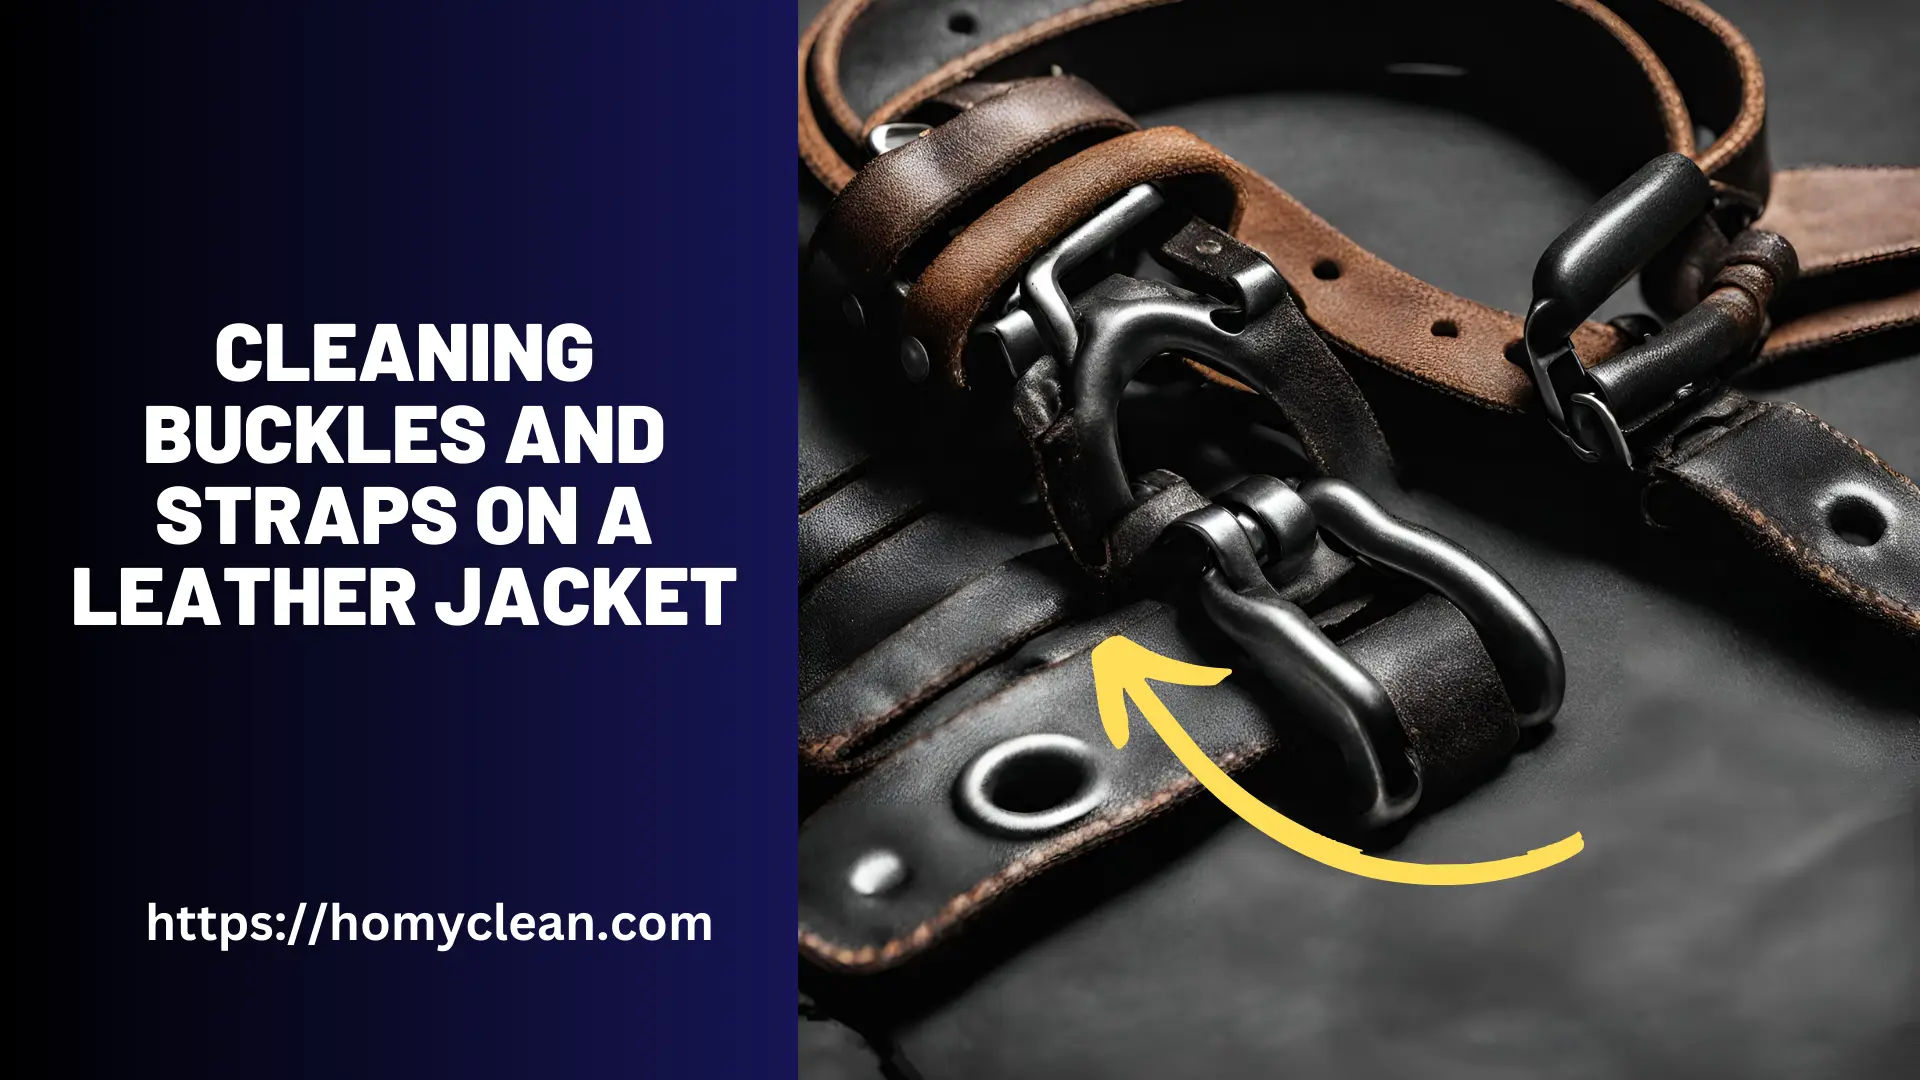 Cleaning Buckles and Straps on a Leather Jacket